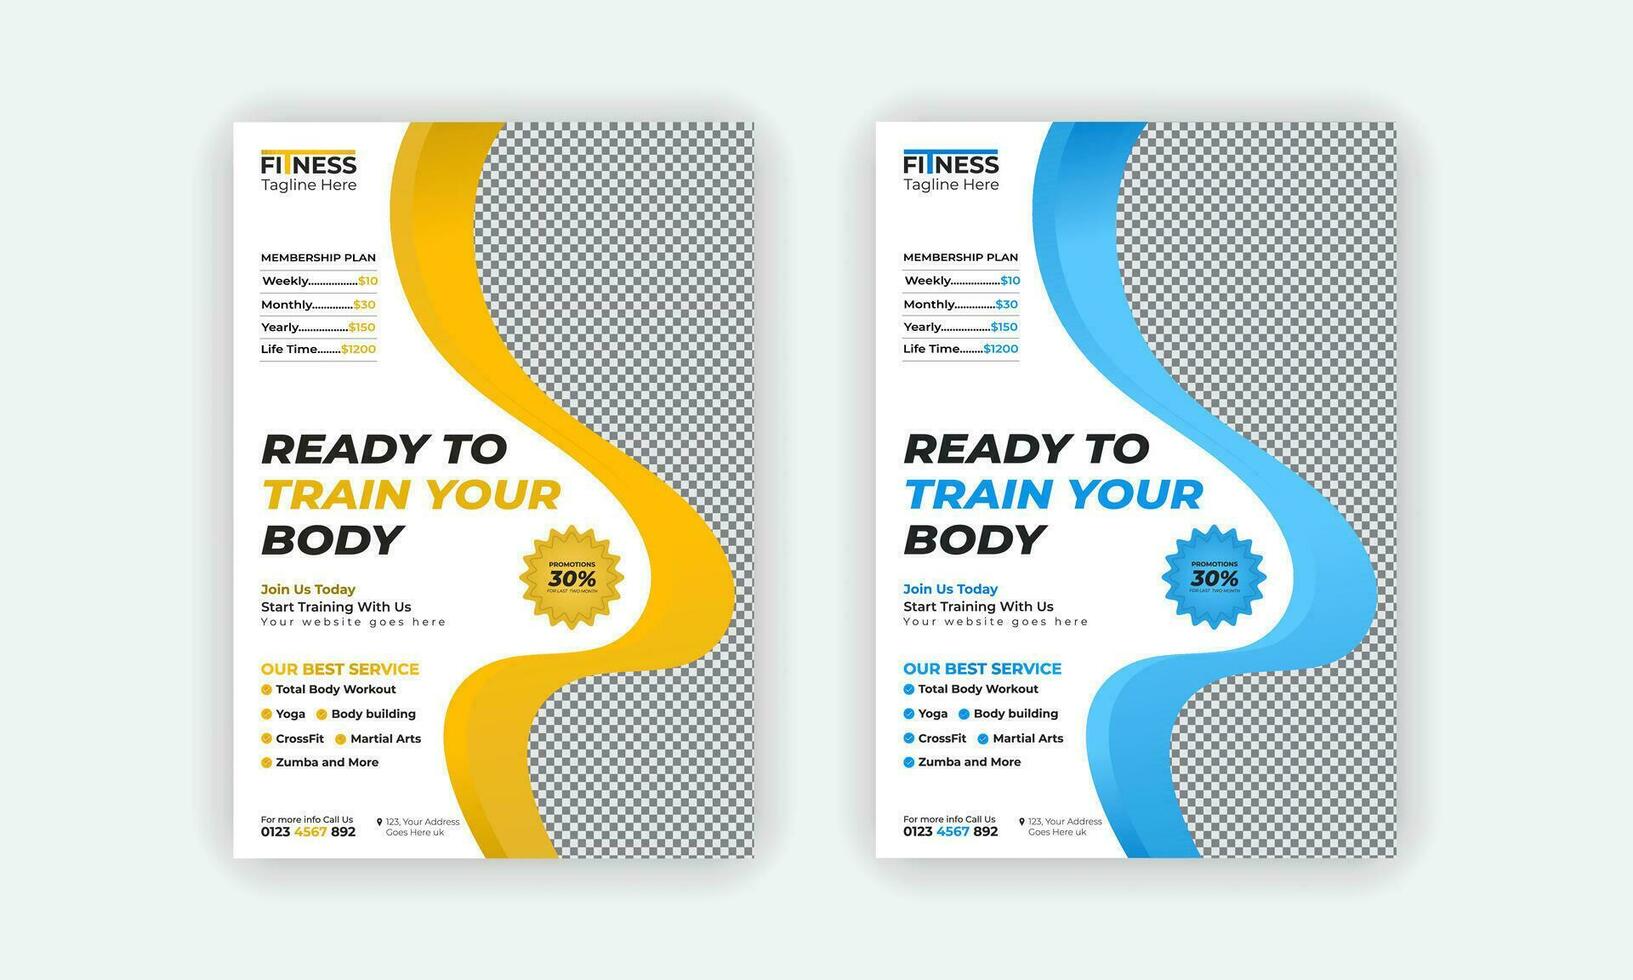 Fitness Gym Flyer and Poster Template or Fitness workout leaflet Design or Professional Fitness Gym layout with 2 color variations vector